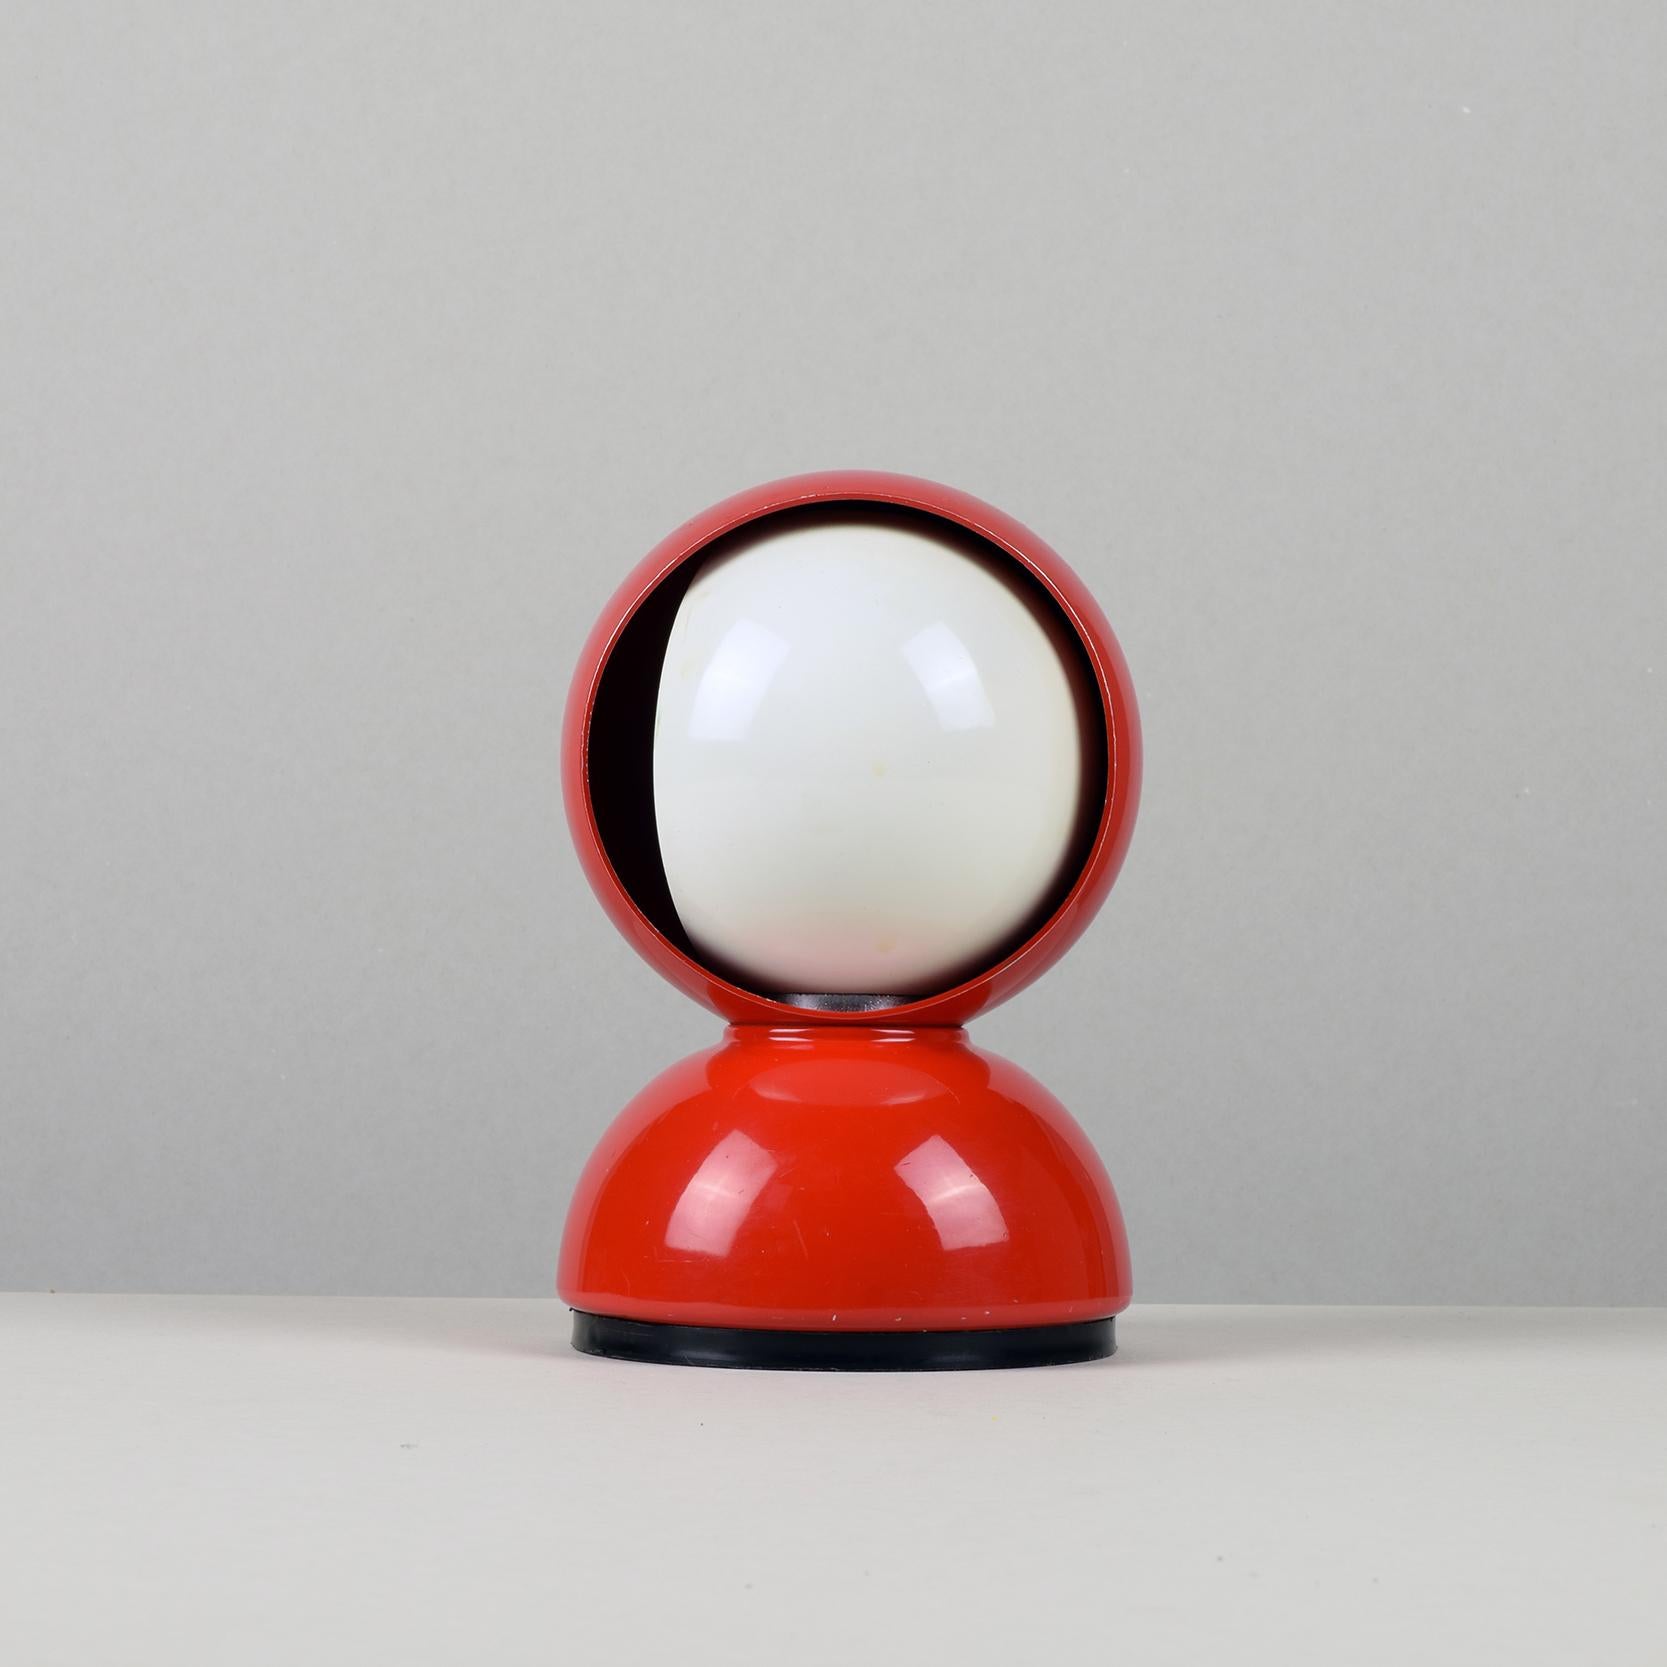 Painted Vico Magistretti, Eclisse 'Eclipse' Table Lamp, Artemide, 1965